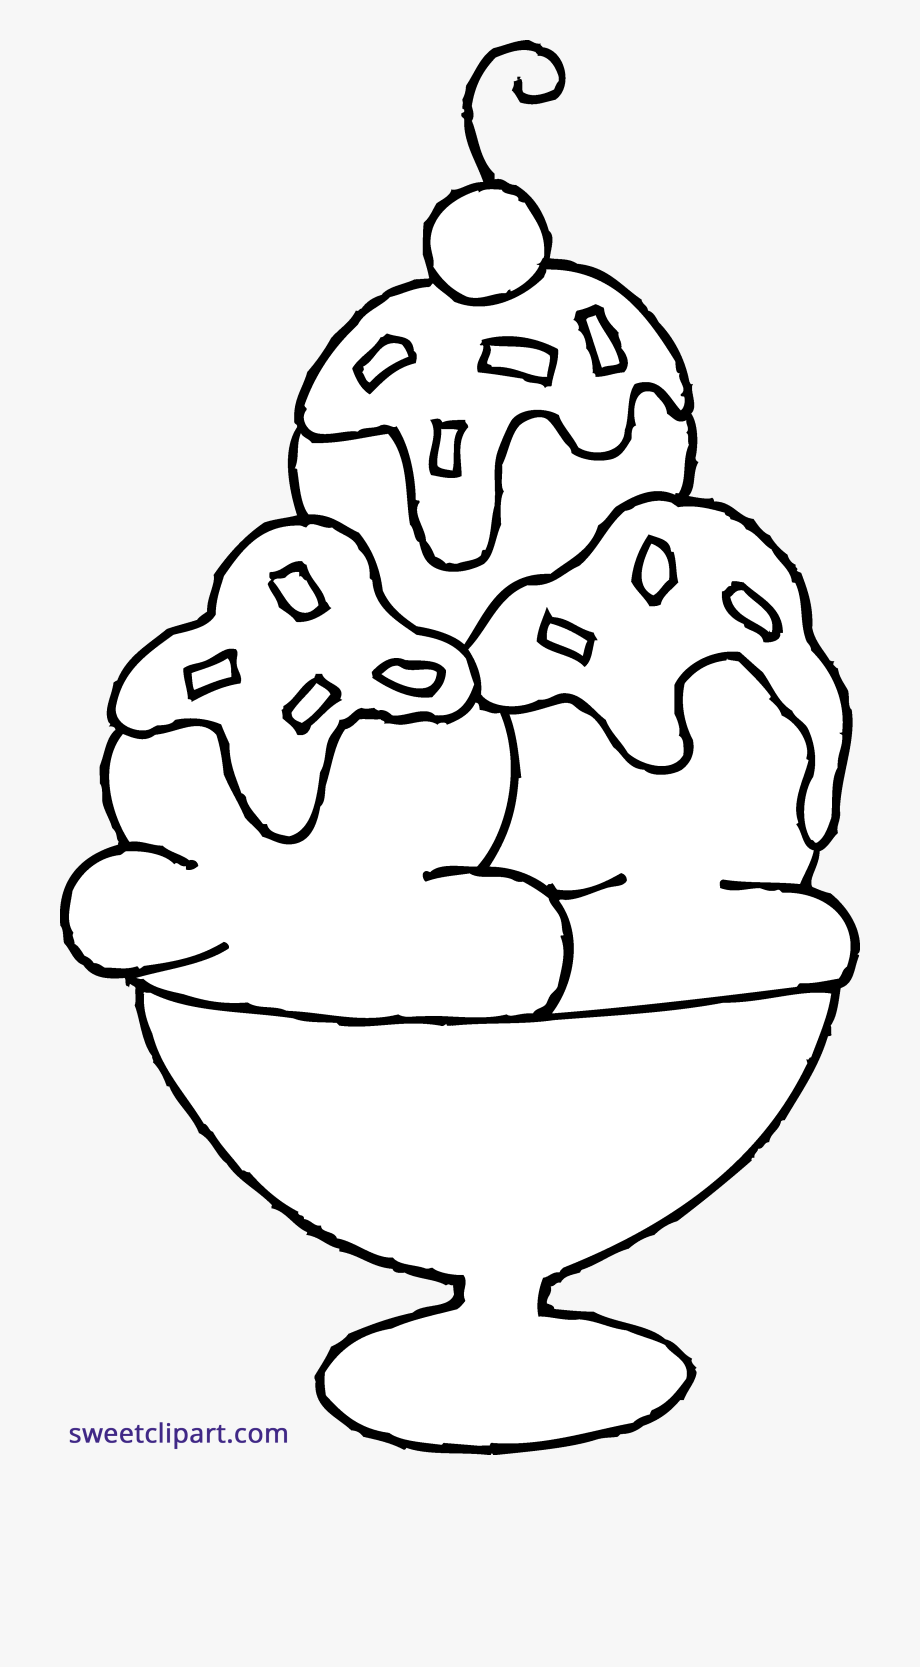 Ice Cream Sundae Coloring Page Clipart Sweet Clip Art.